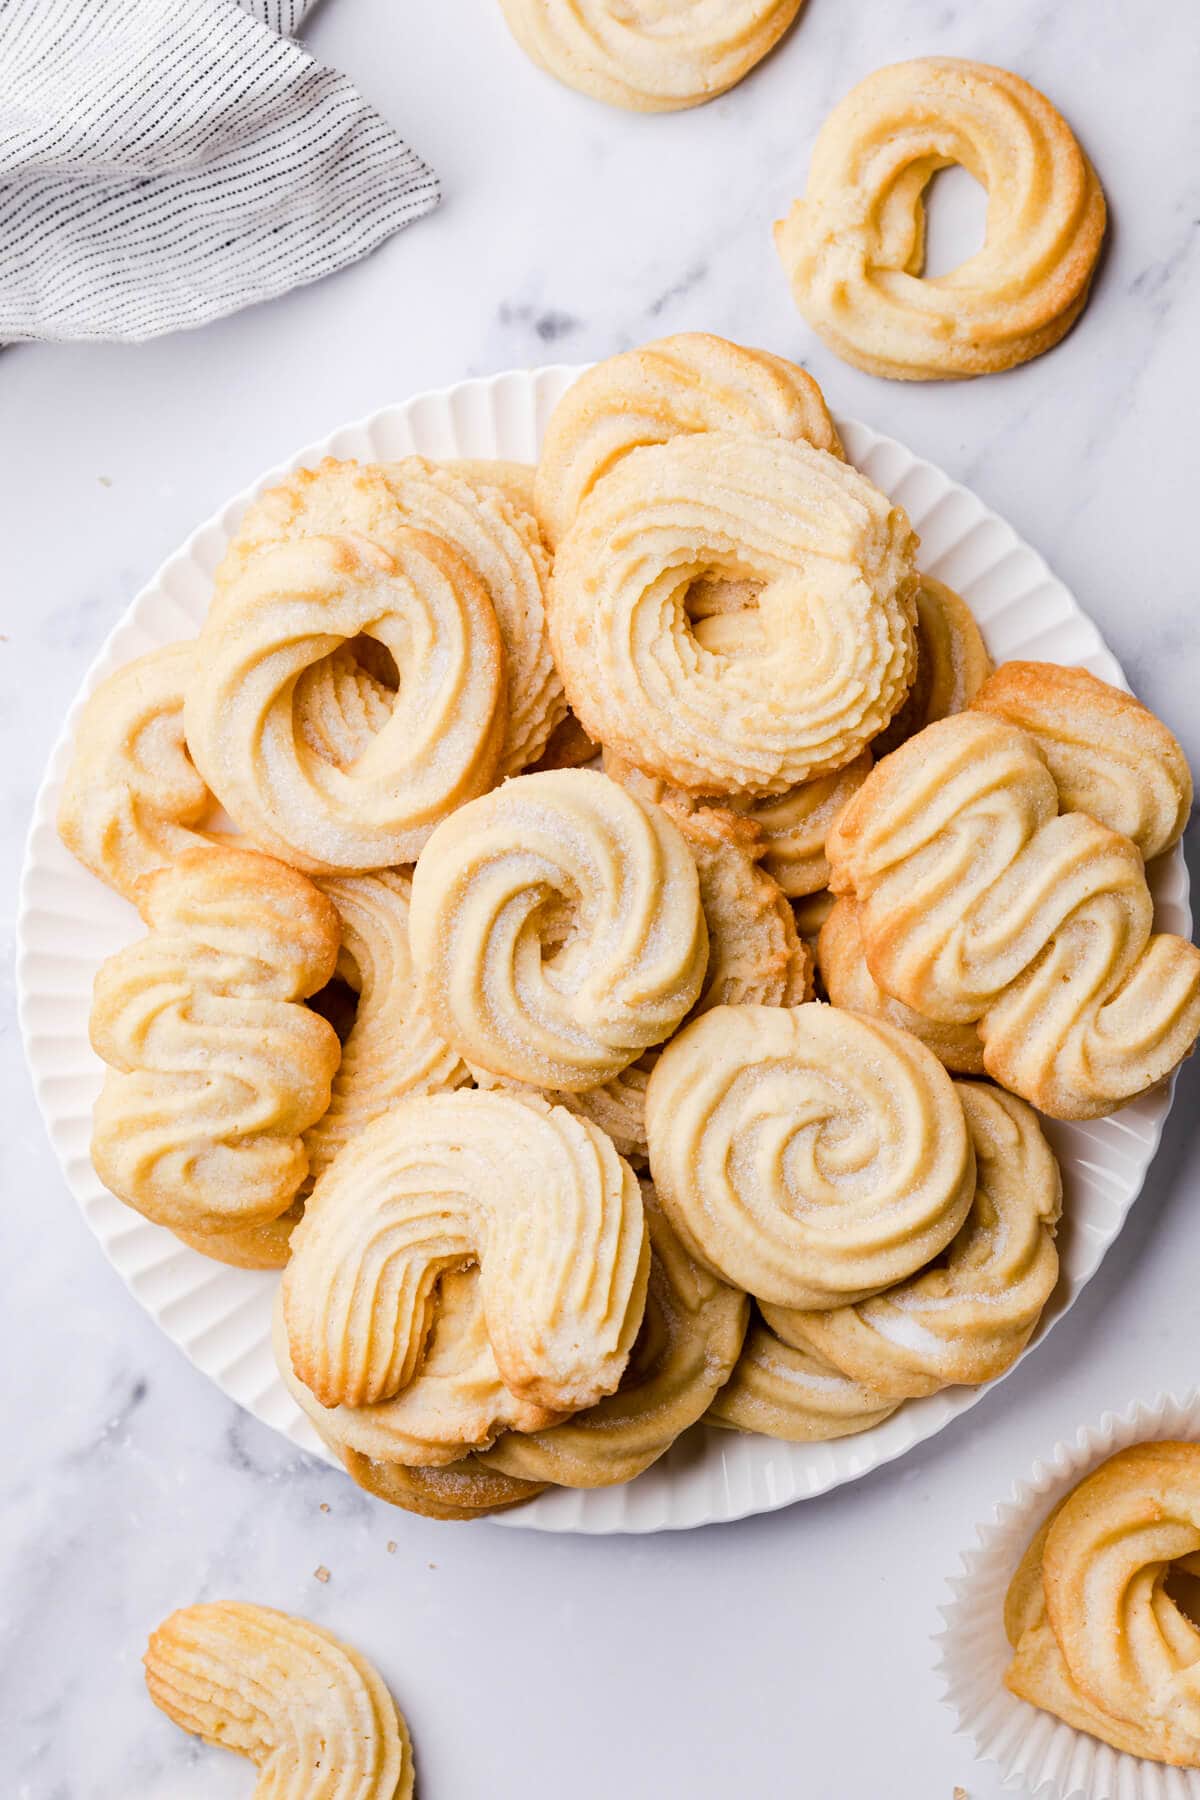 selection of Danish style butter cookies in different shapes on a white plate.